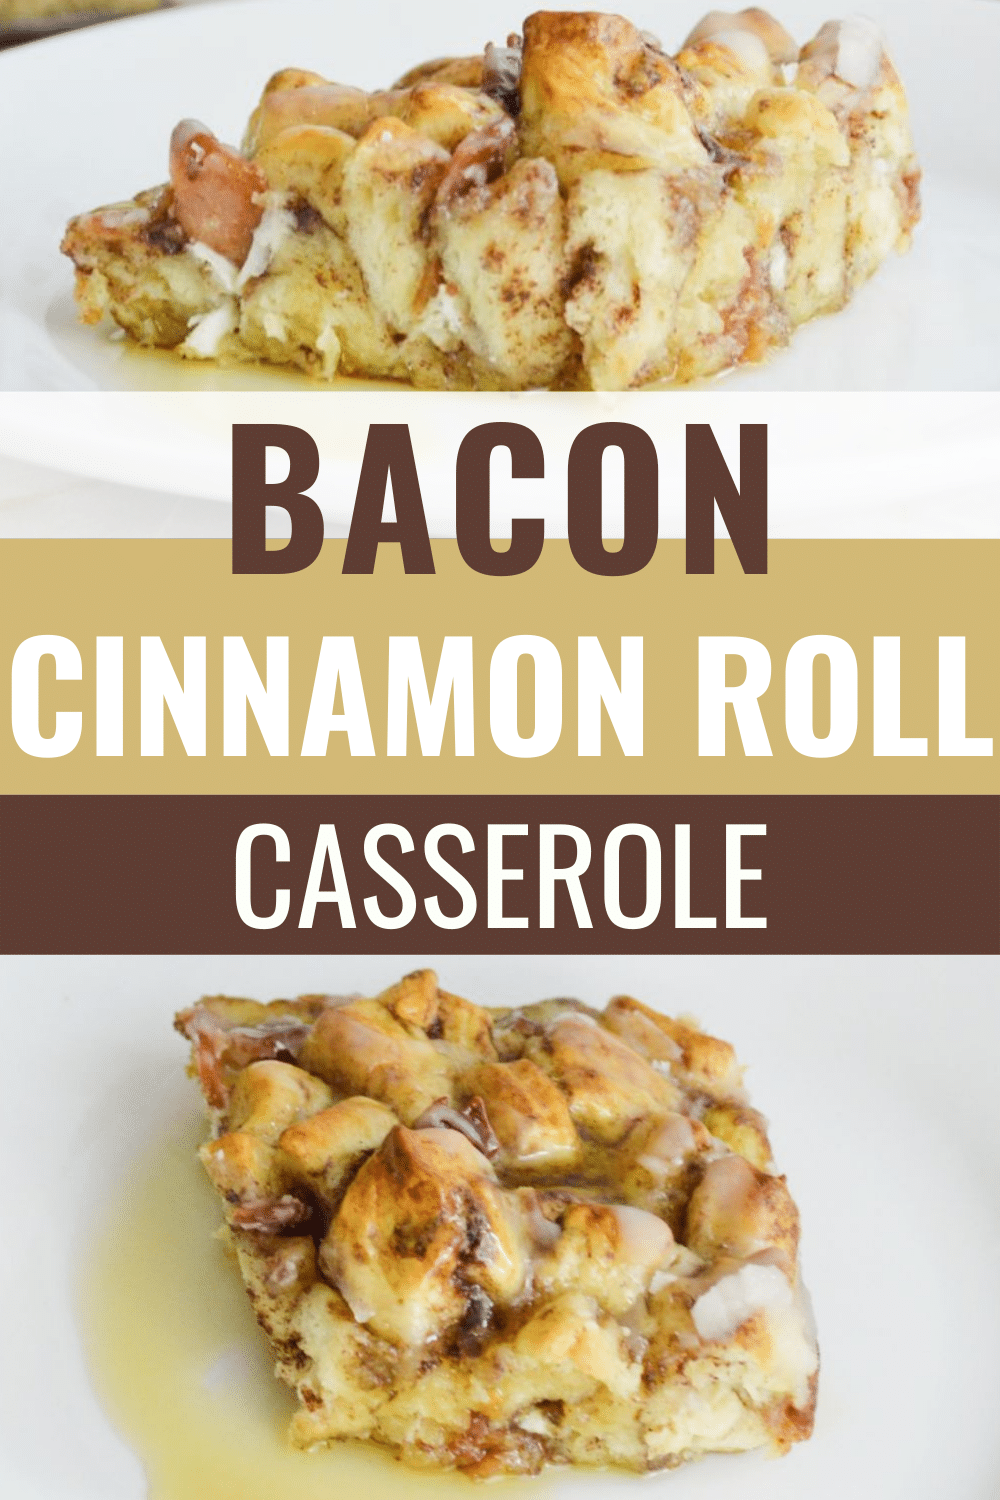 Bacon Cinnamon Roll Casserole is breakfast perfection. You get two of the best breakfast flavors in one dish! (just four ingredients!) #casserole #breakfast #bacon #cinnamonroll #recipe via @wondermomwannab